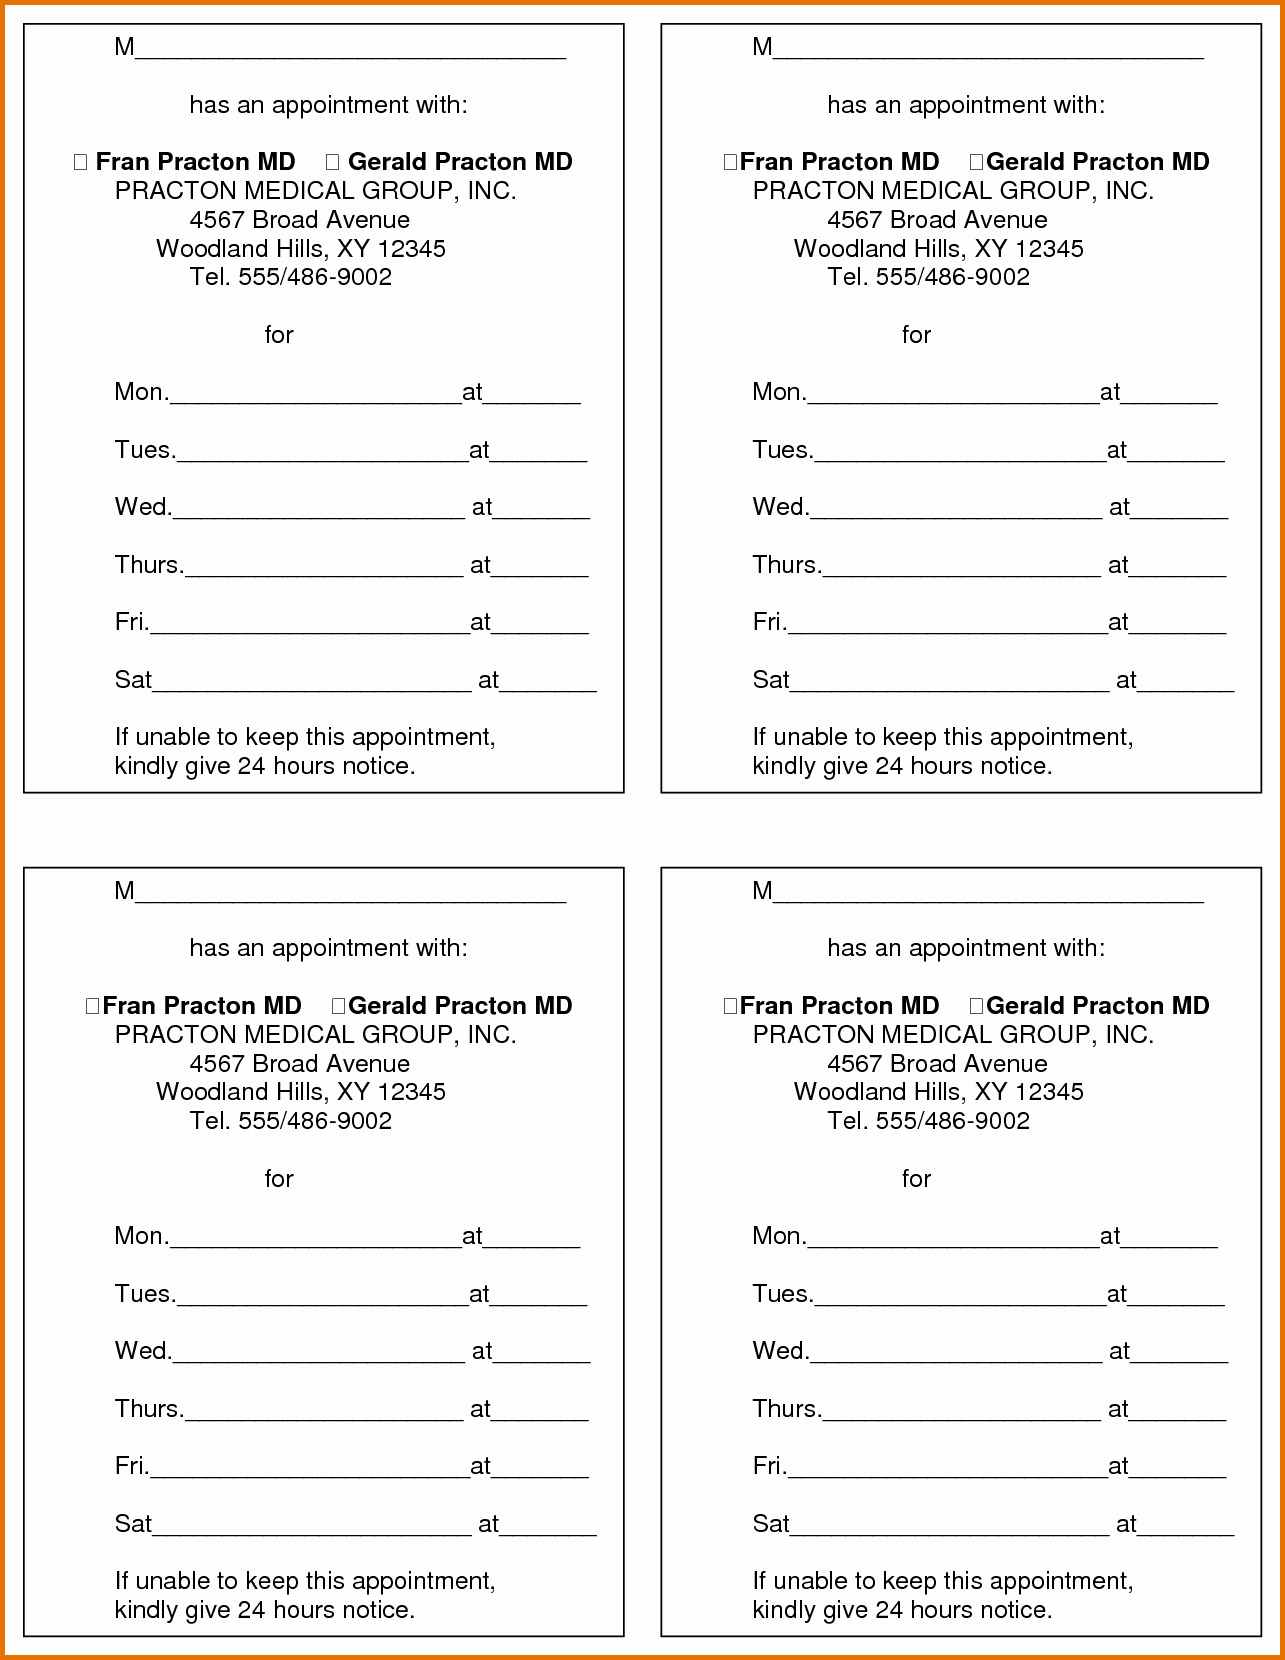 8 Appointment Card Templatereference Letters Words